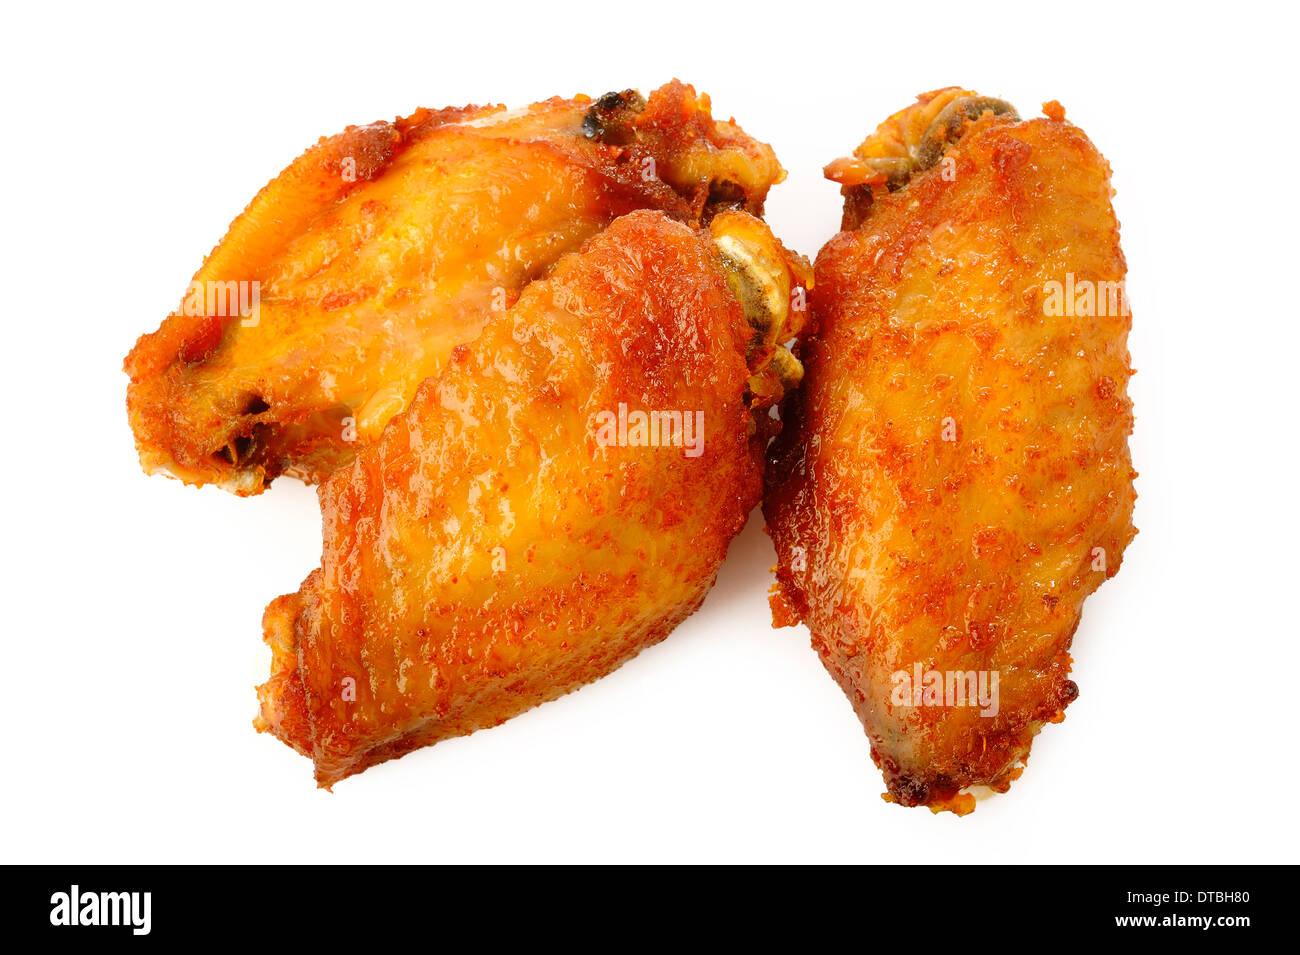 Spicy chicken wings on white background Stock Photo